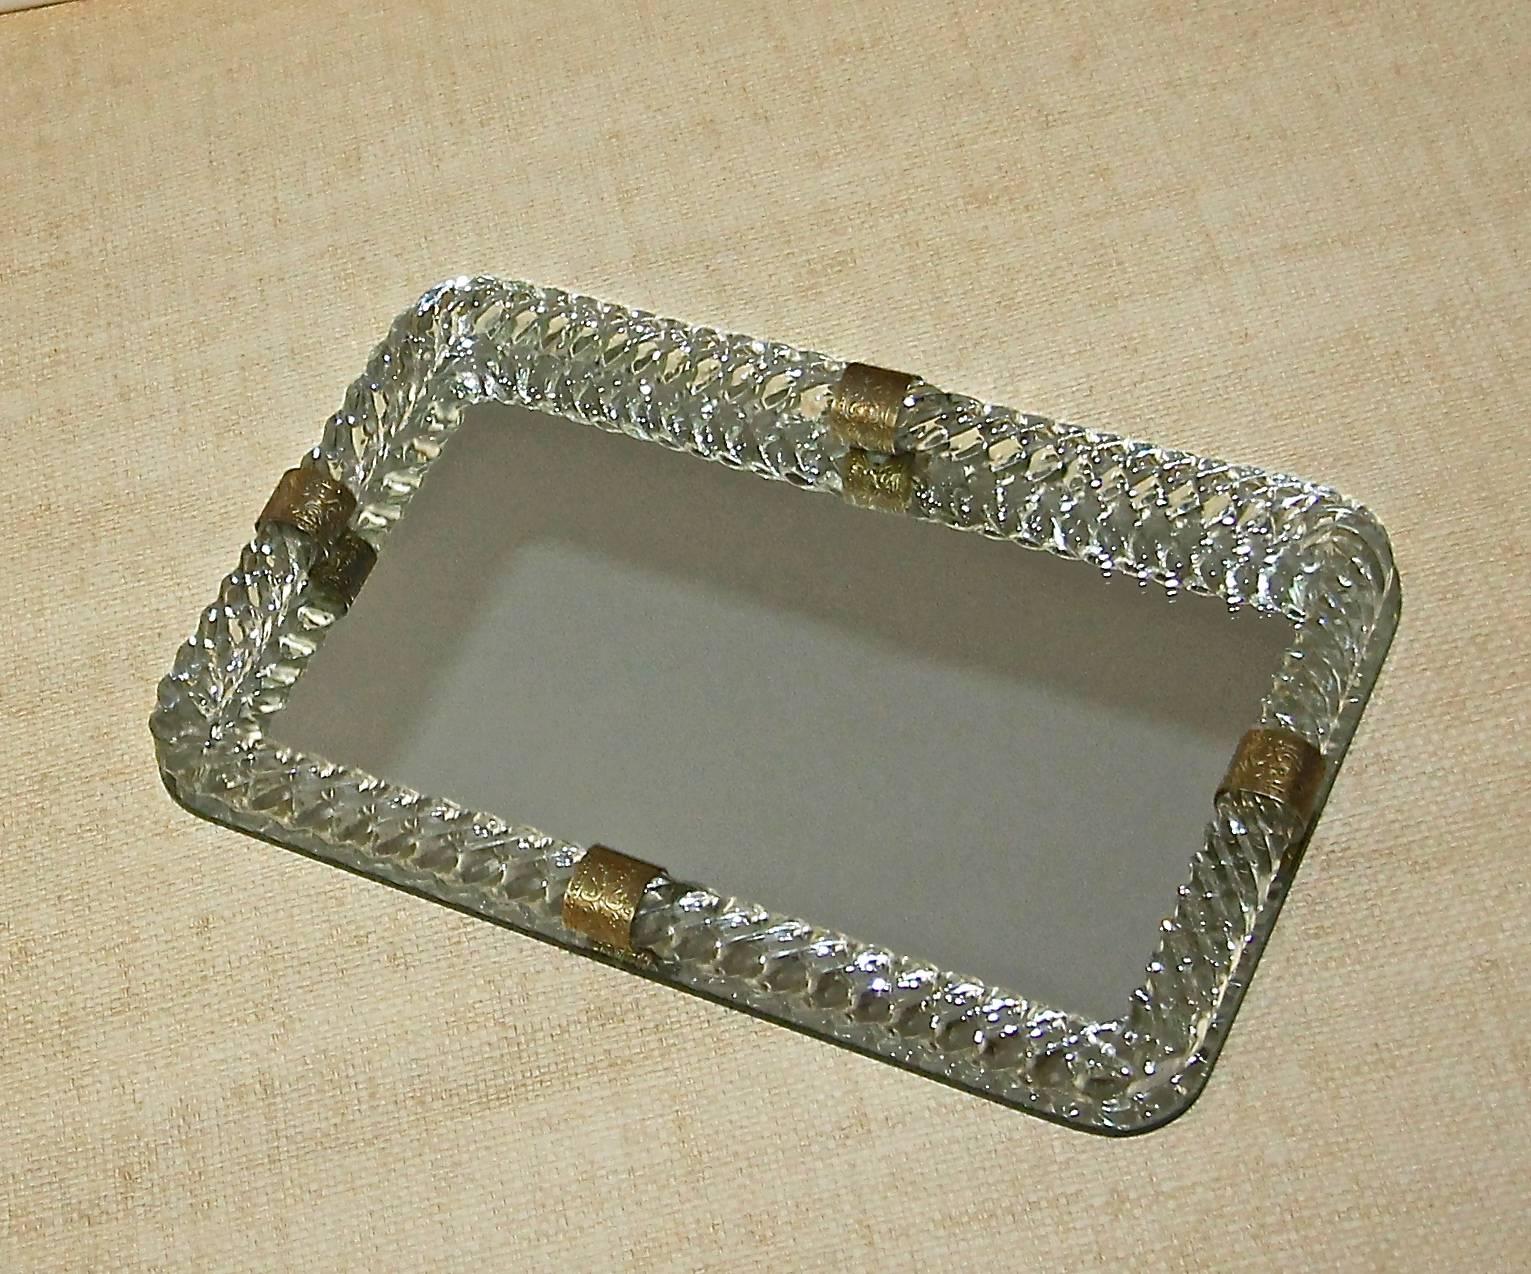 Italian mirrored glass vanity tray surmounted by thick twisted mouth blown glass with decorative brass straps.